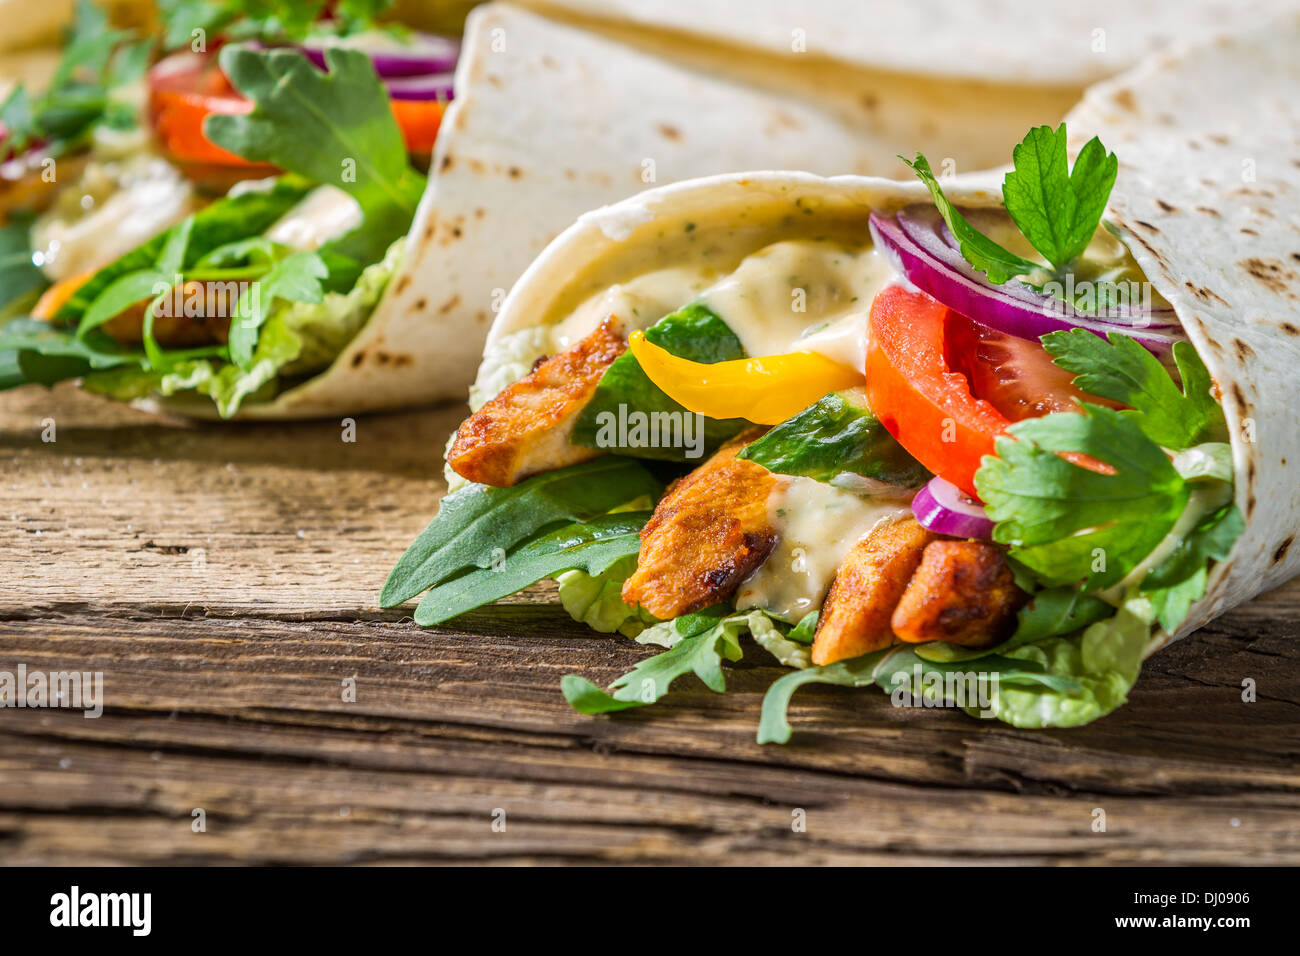 Closeup of tasty kebab with vegetables and chicken Stock Photo